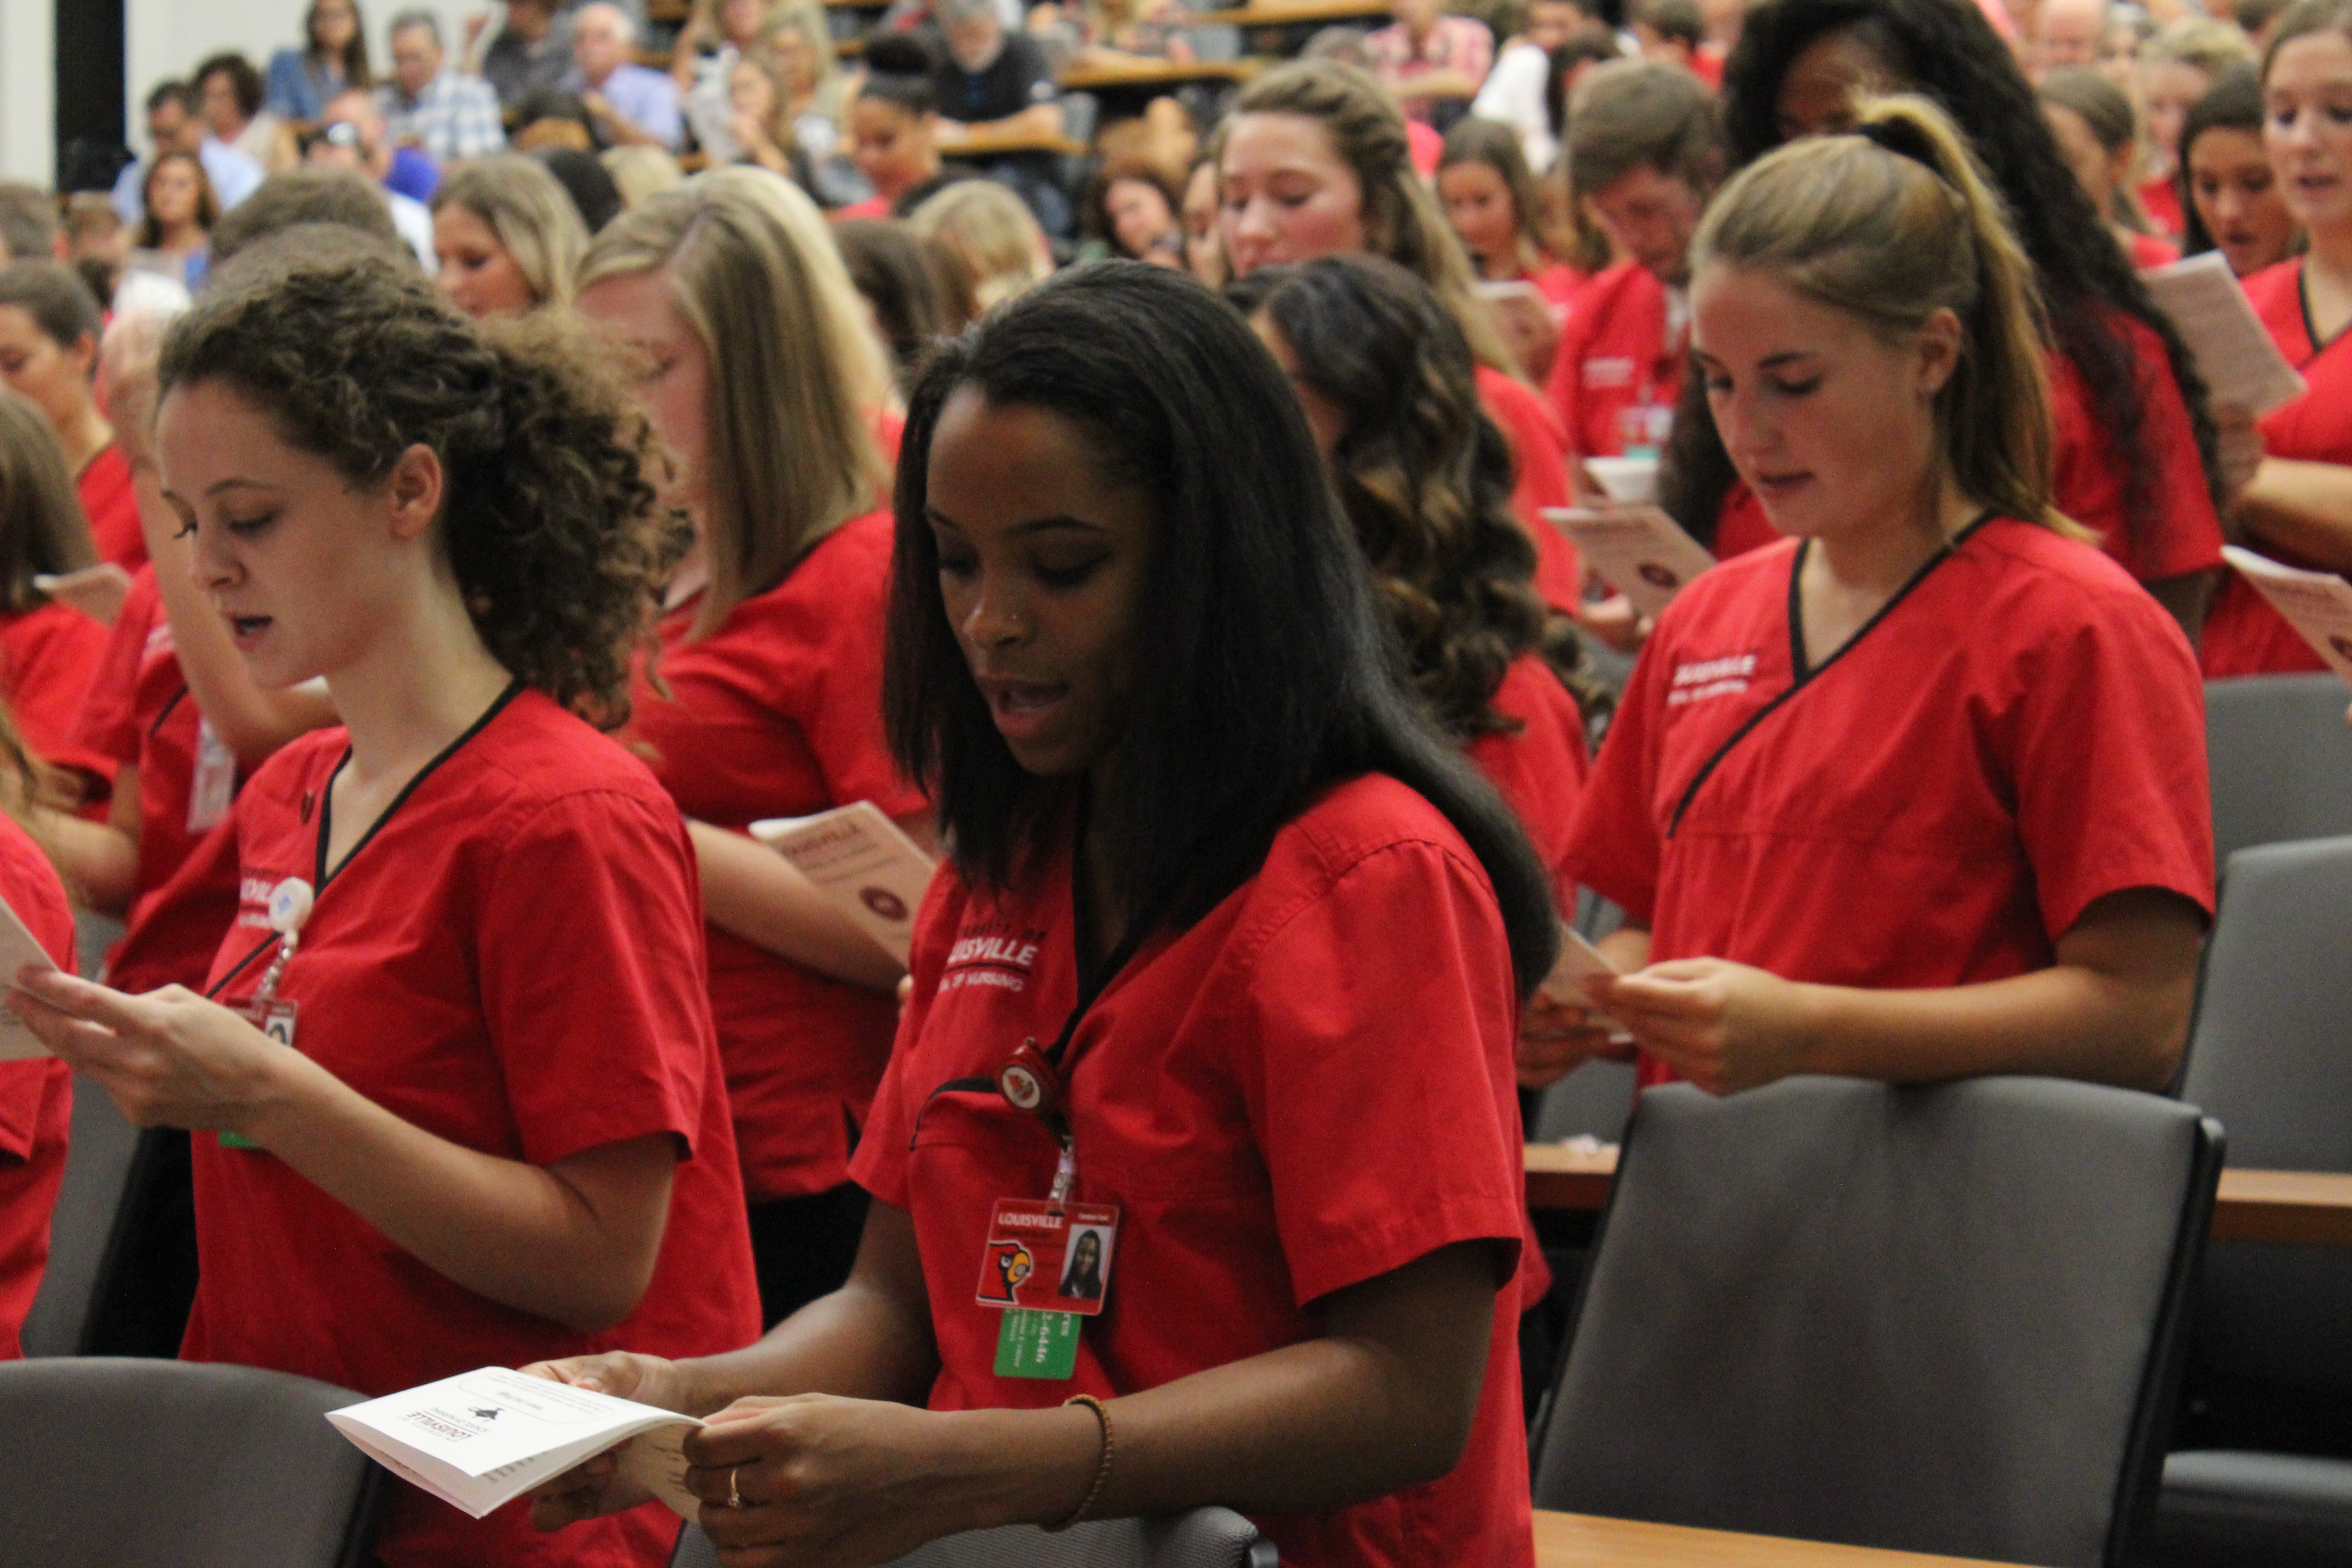 Transition Ceremony welcomes 90 students to nursing profession